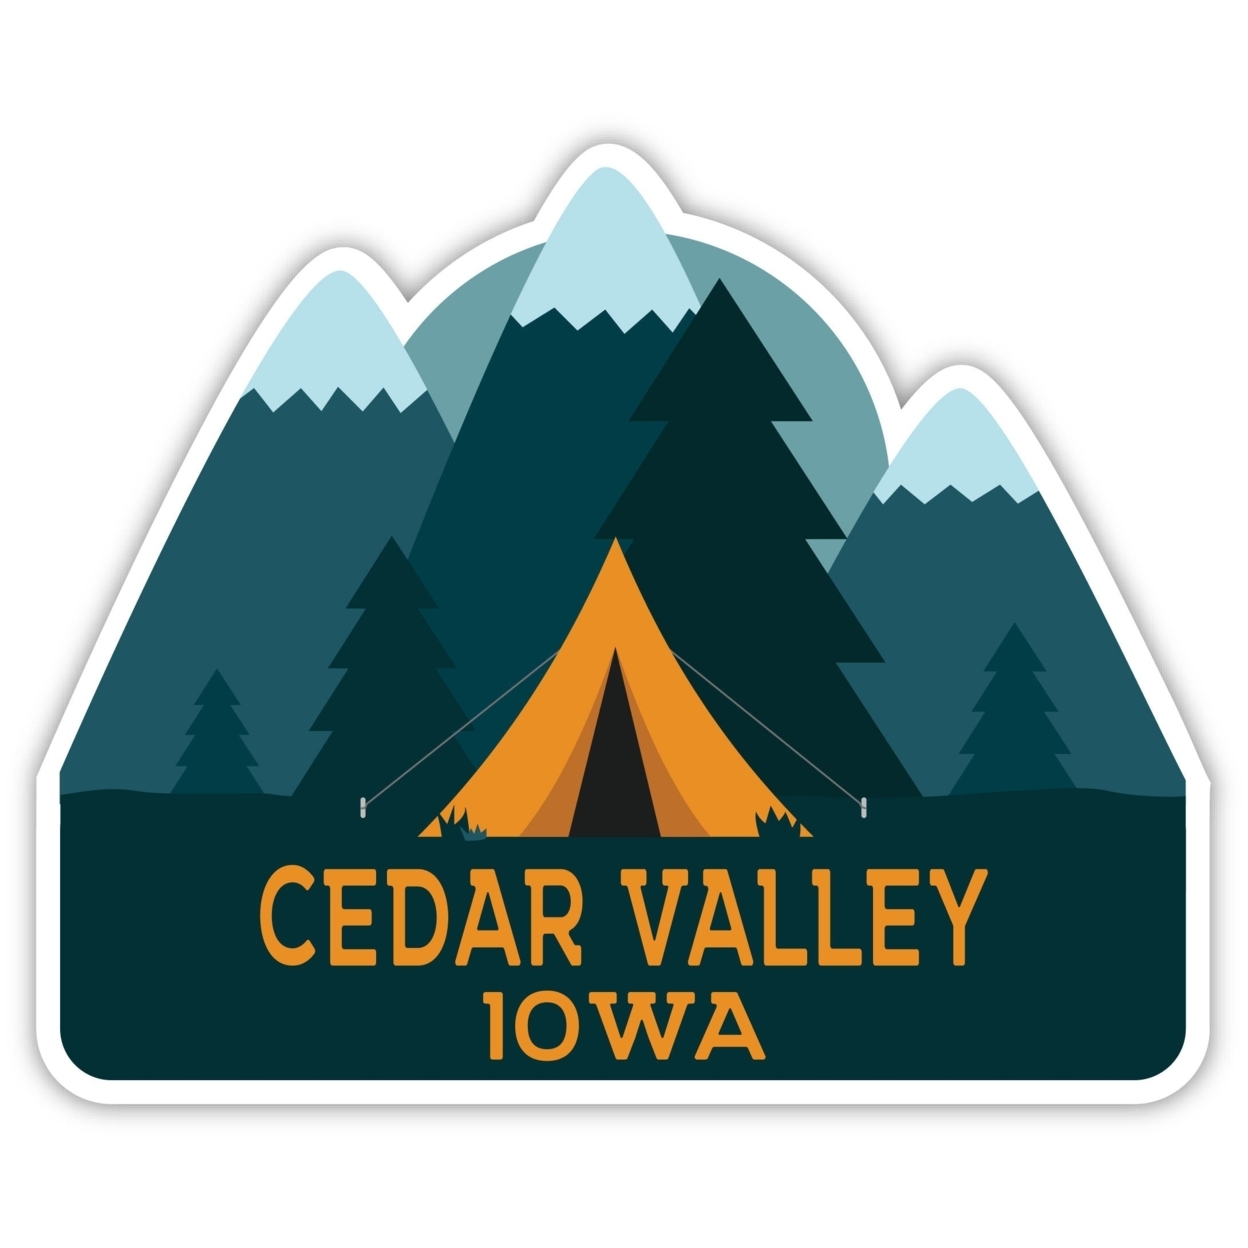 Cedar Valley Iowa Souvenir Decorative Stickers (Choose Theme And Size) - 4-Pack, 8-Inch, Tent